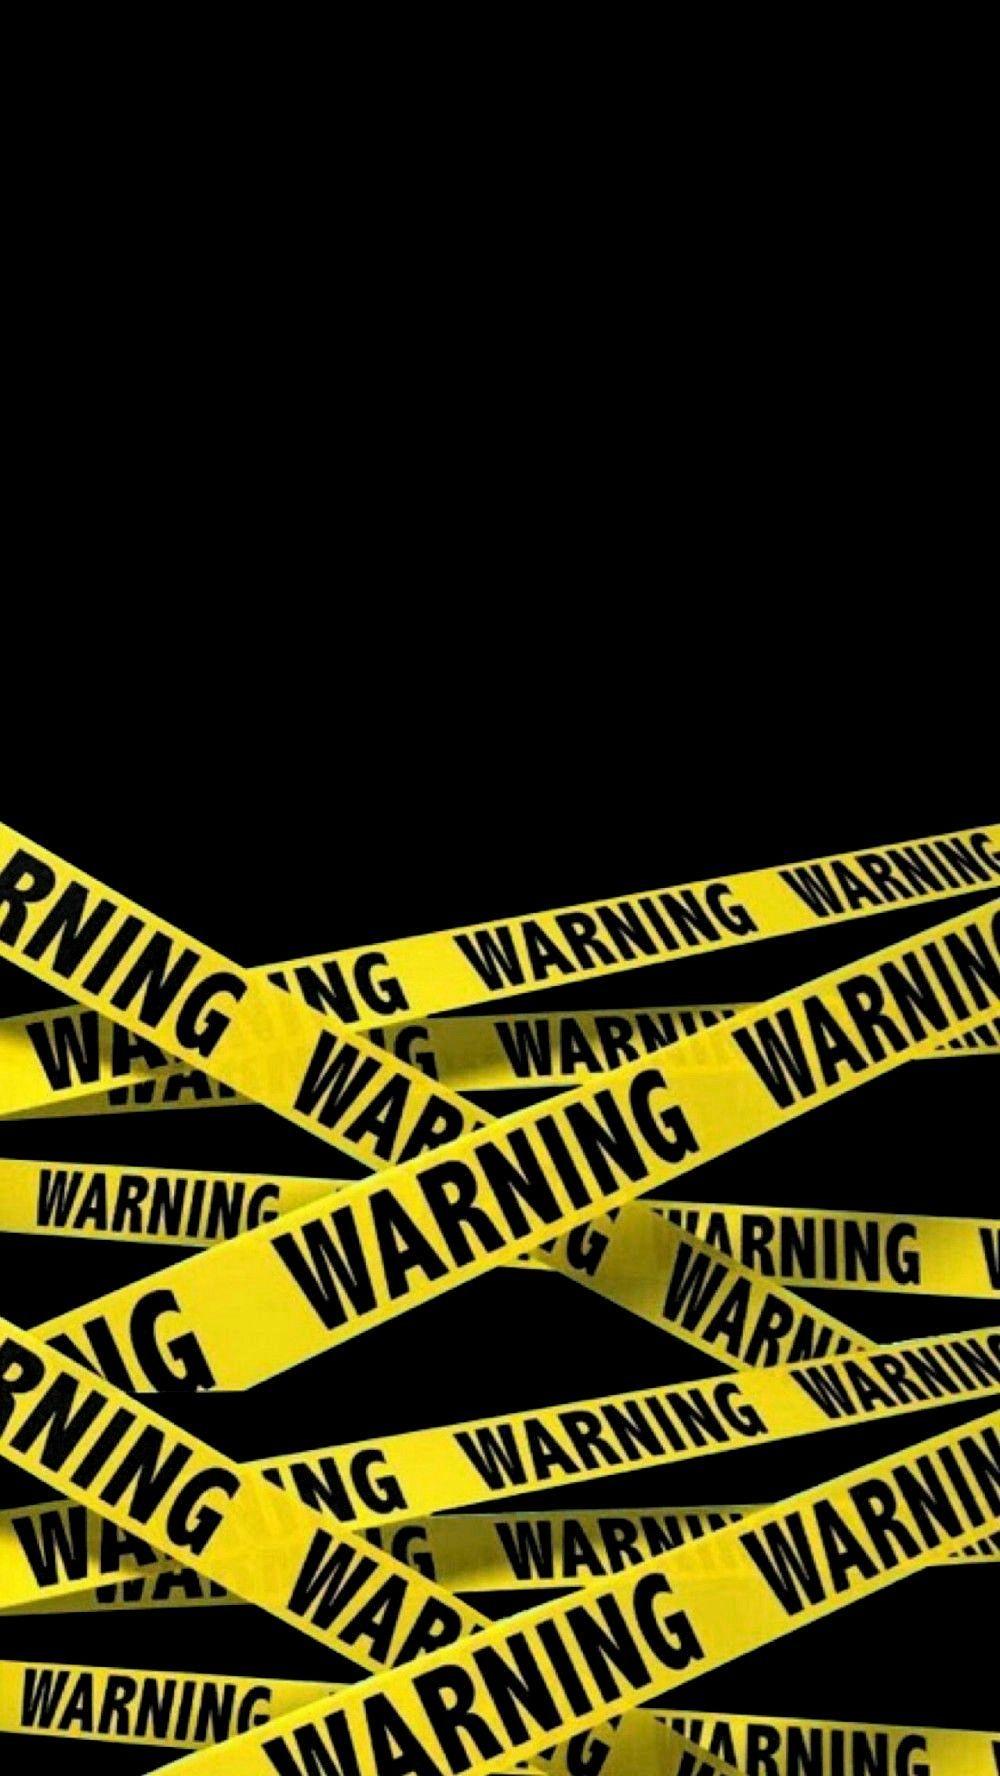 A yellow warning tape is on the black background - Funny